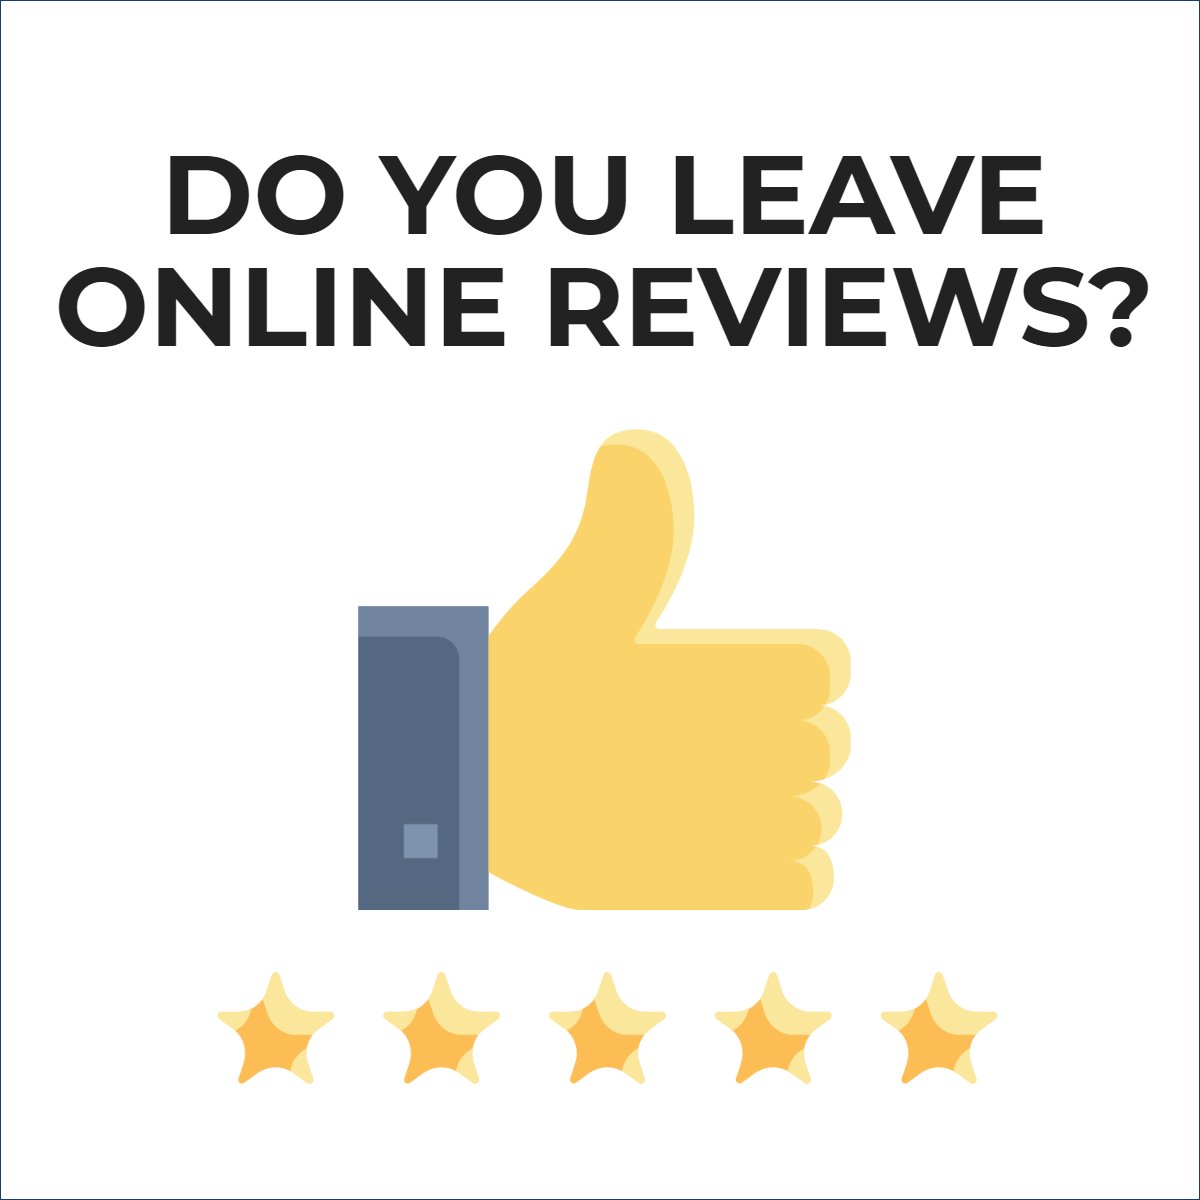 Did you know that 90% of consumers read online reviews before visiting a business? 😉

#onlinereviews #onlinereviewsmatter #realestate #realestatecoach #digitalmarketing #reviews #reputation